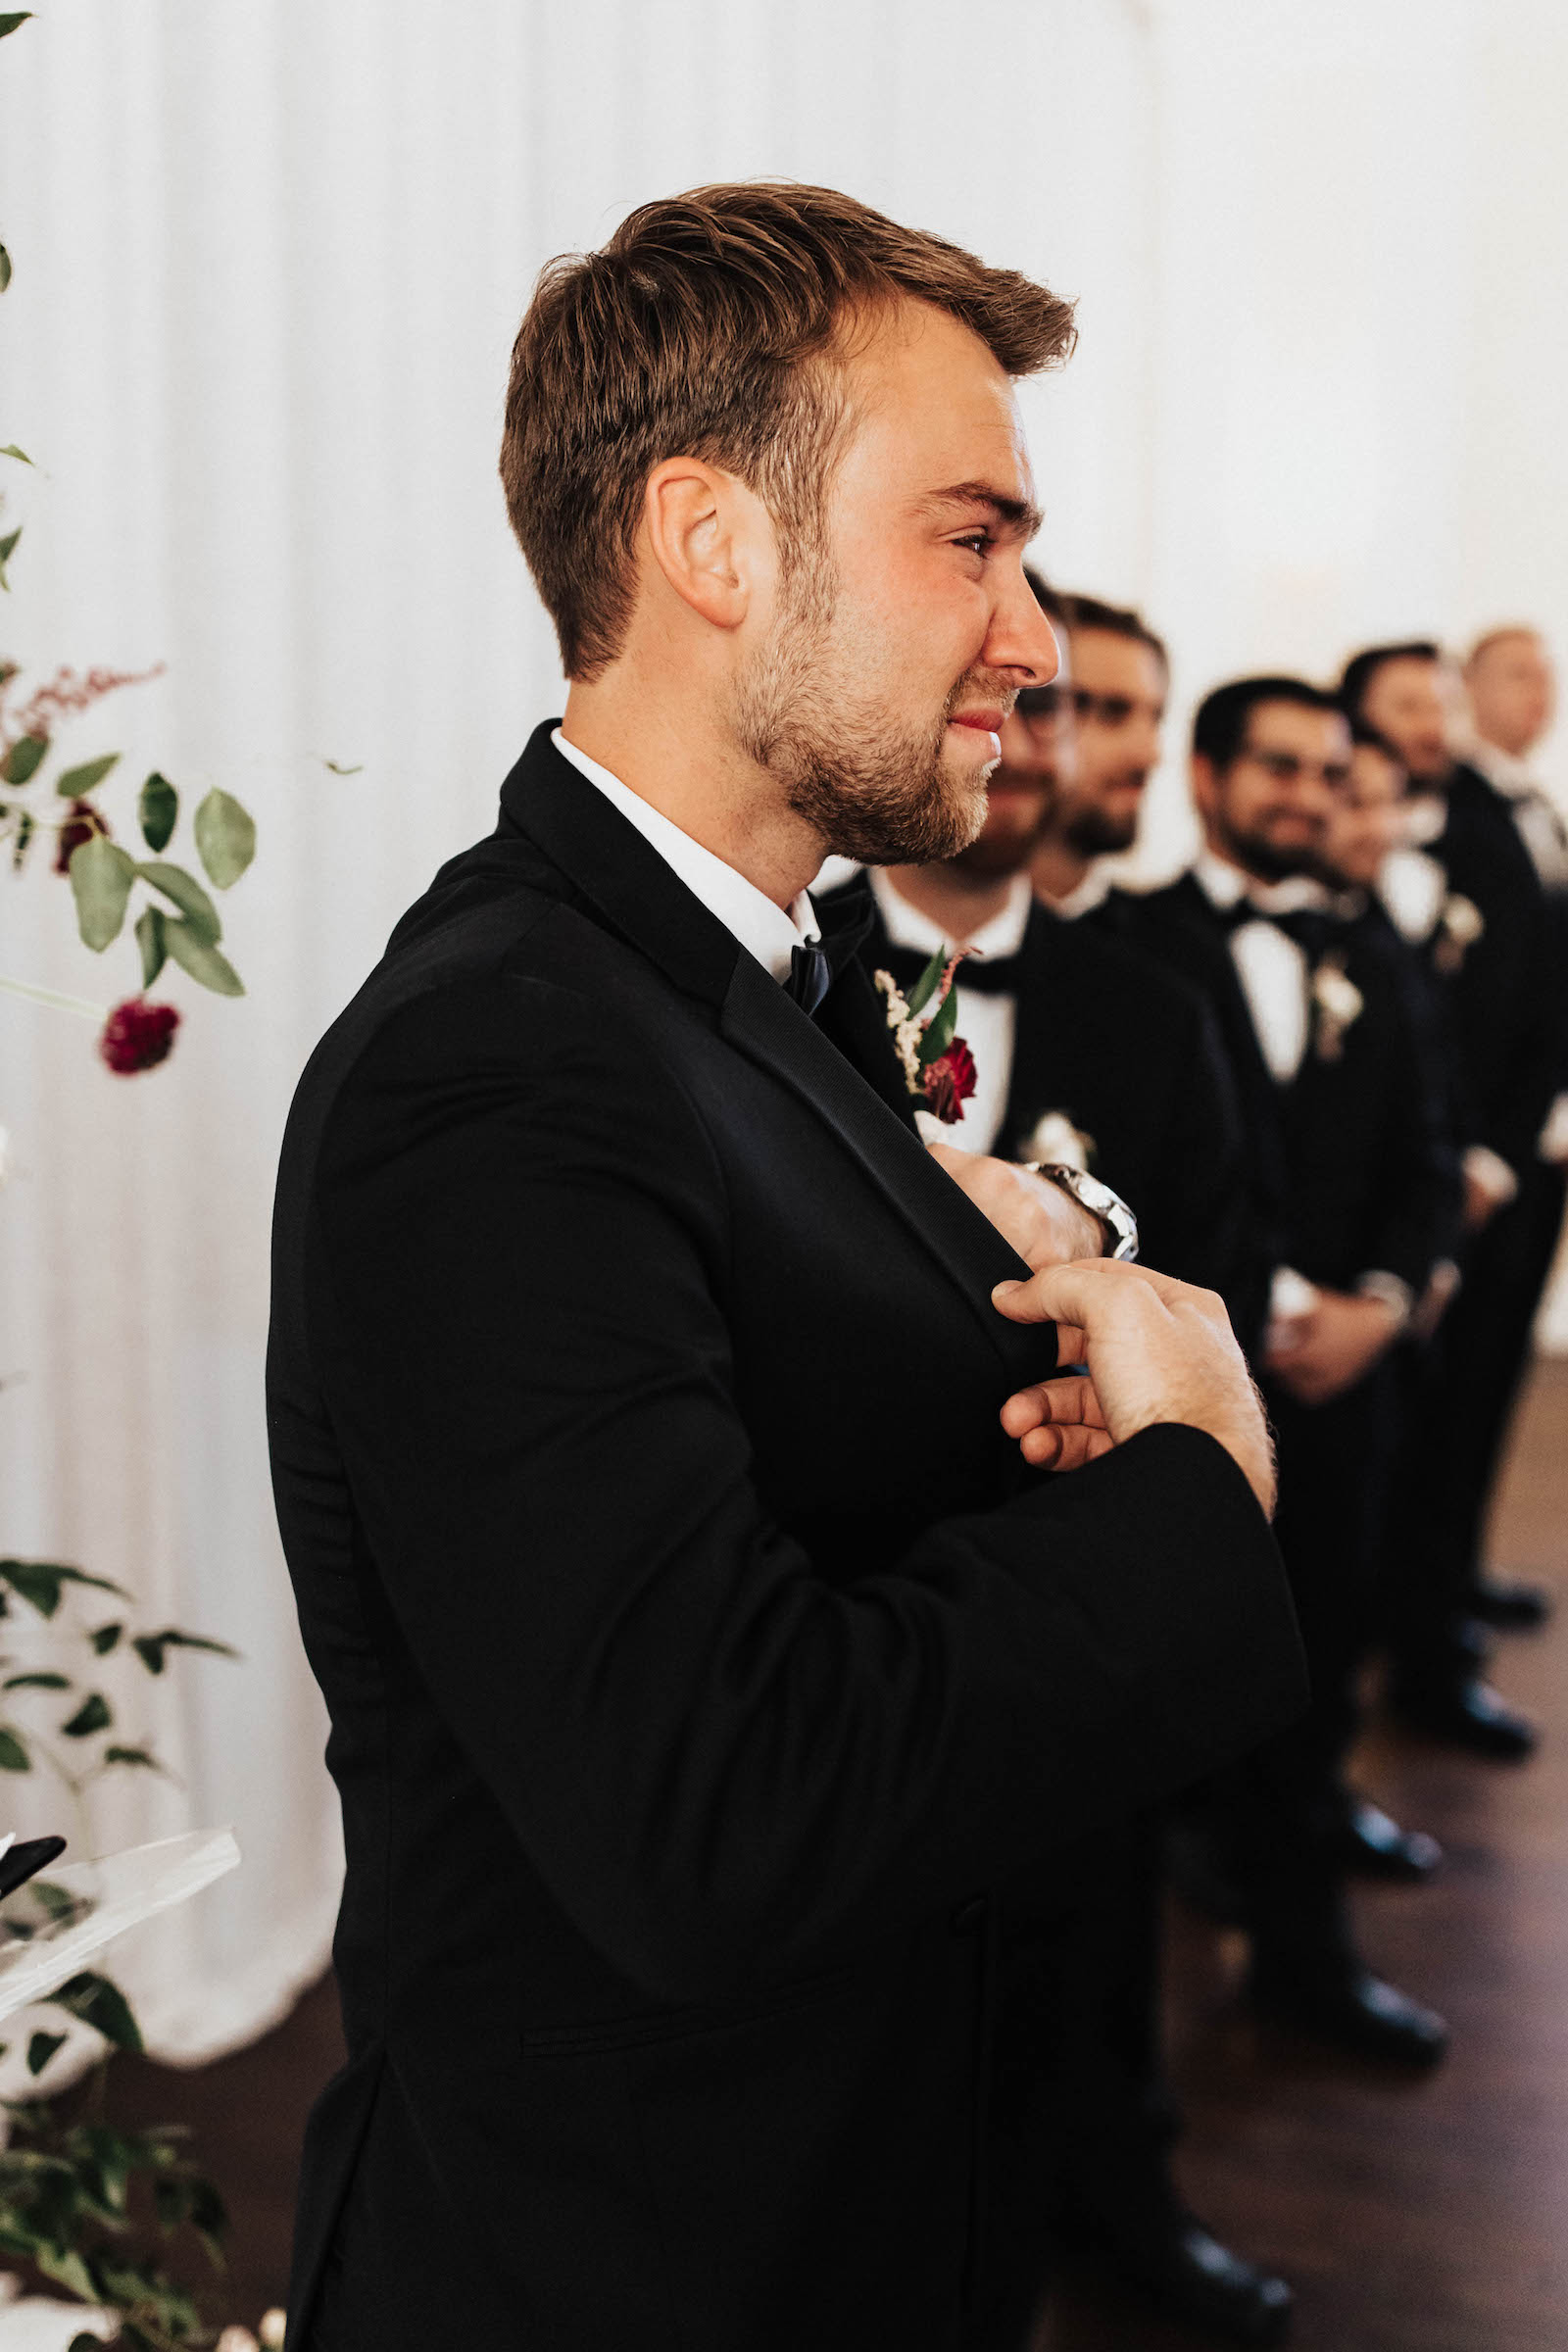 Warm Romantic Neutral Wedding Ceremony, Groom Emotional Reaction to Watching Bride Walking Down the Aisle Wedding Portrait